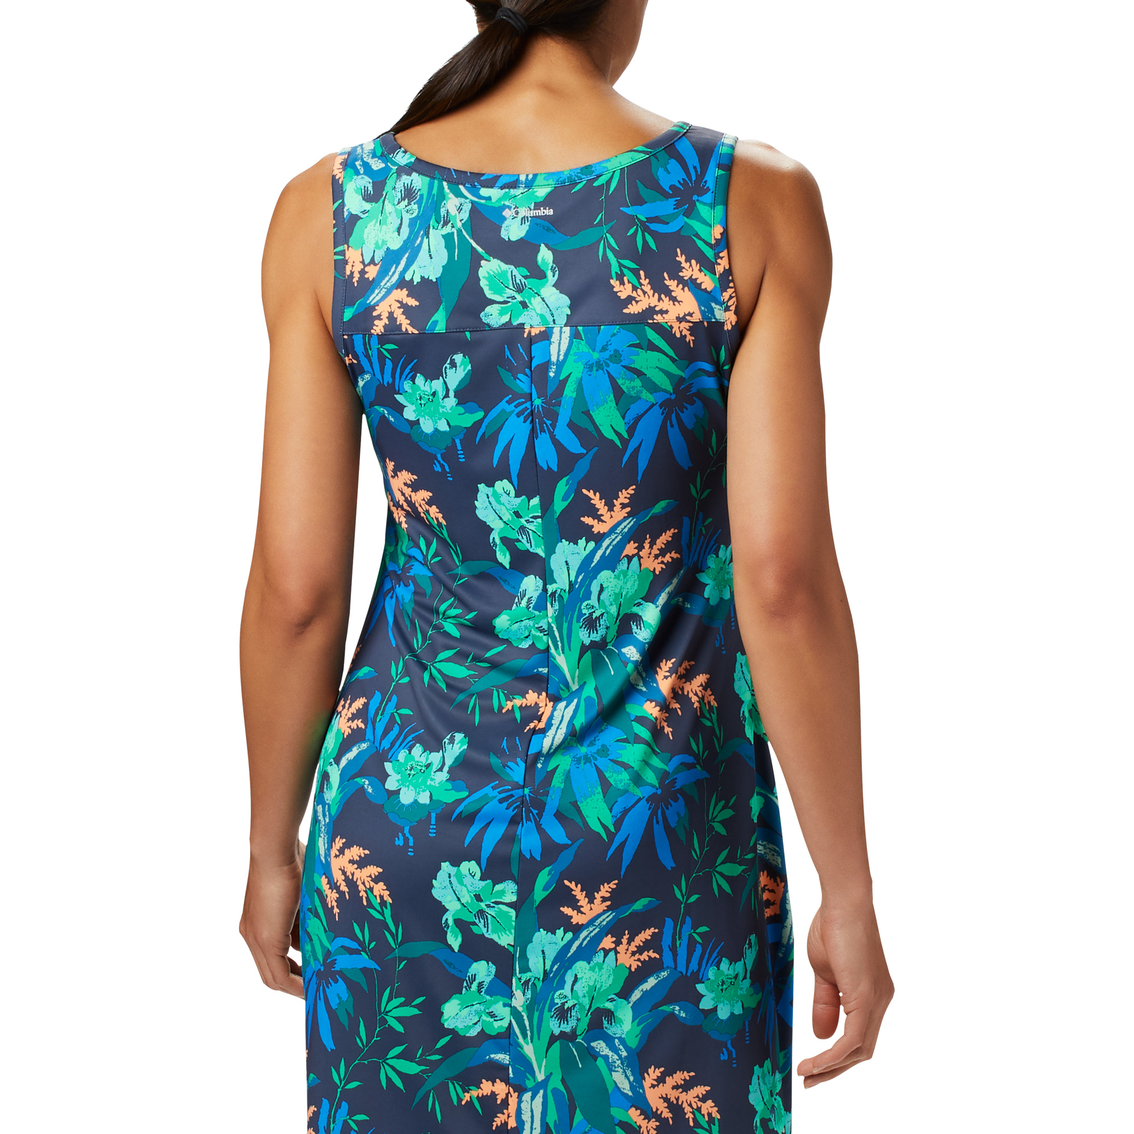 Columbia Chill River Printed Dress - Image 4 of 5